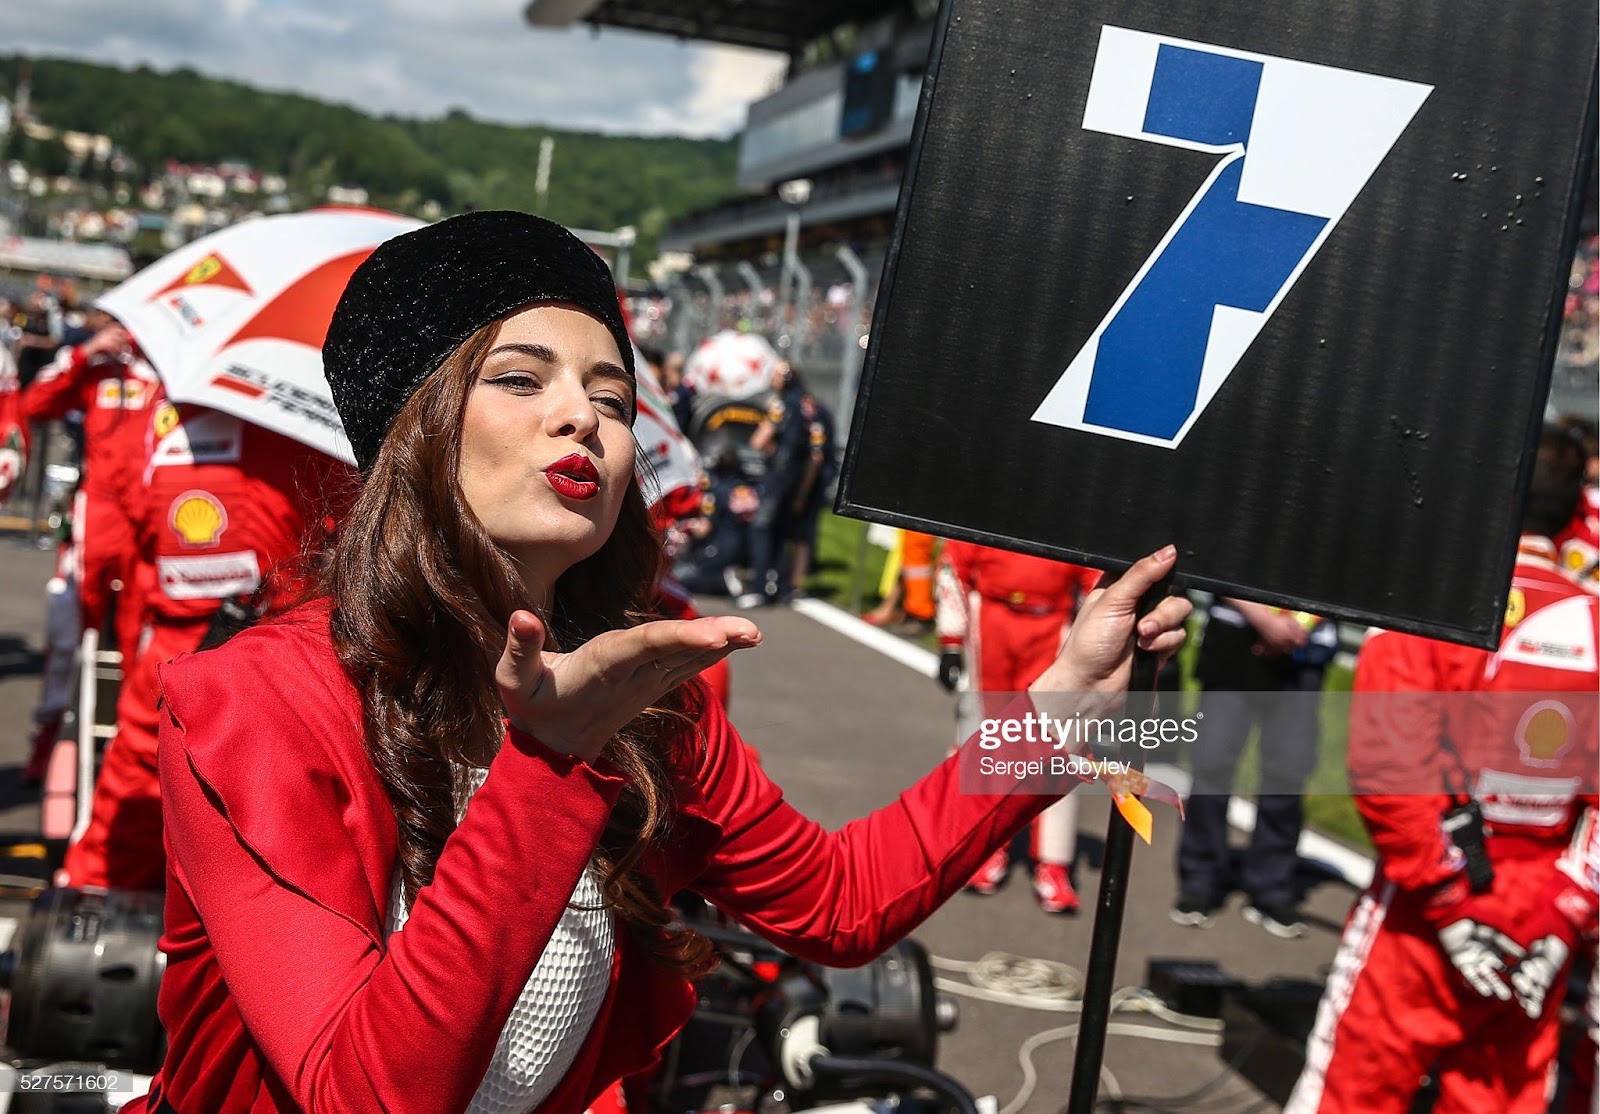 A girl at the 2016 Formula 1 Russian Grand Prix at the Sochi Autodrom Circuit in Olympic Park.